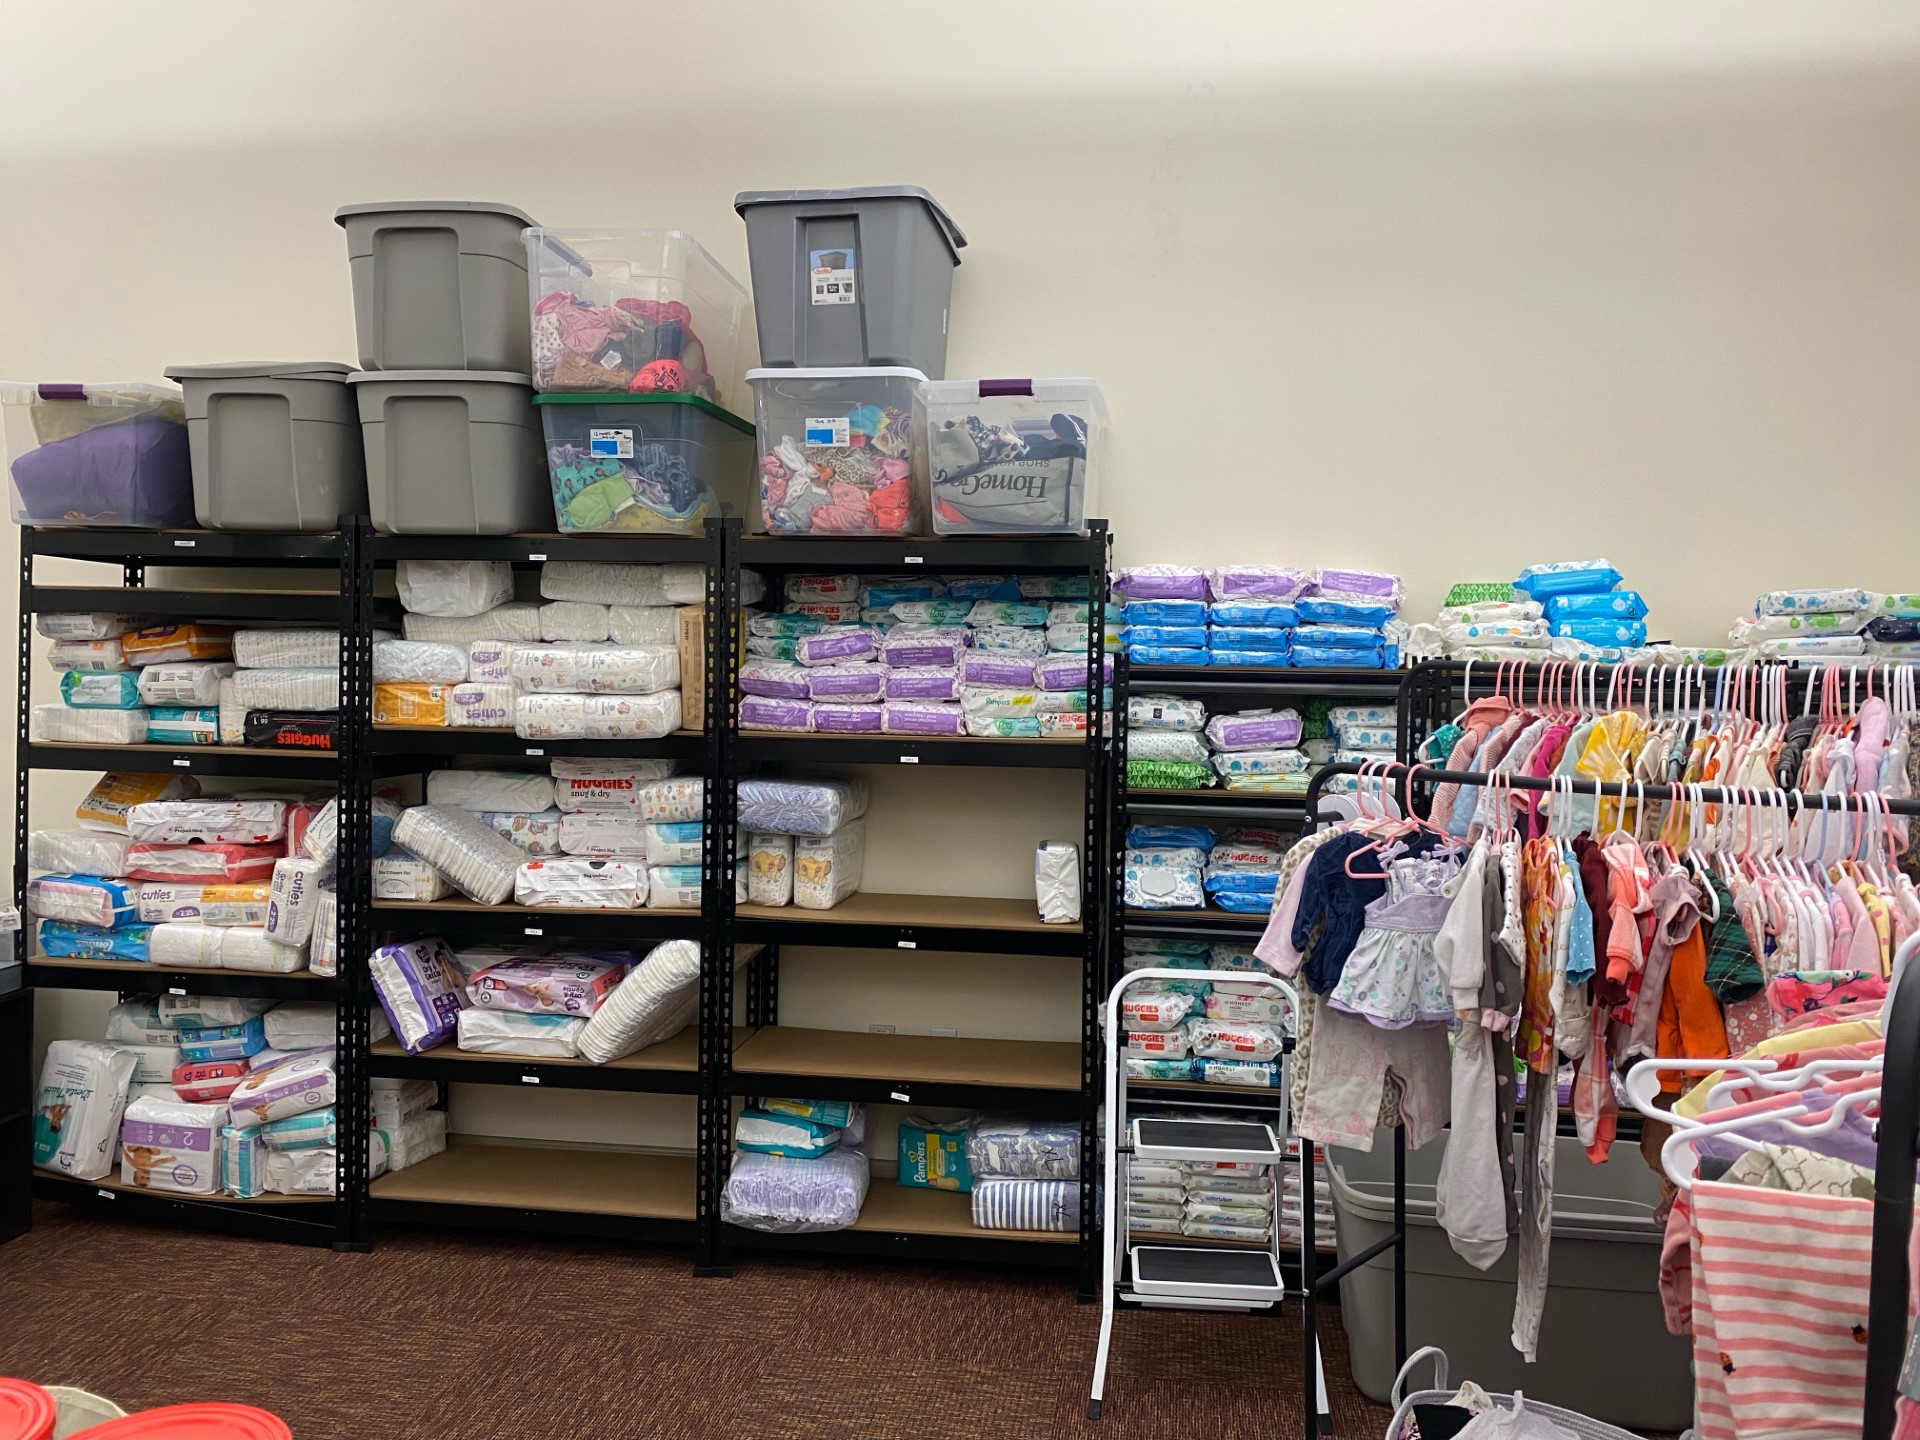 shelves of diapers, baby clothes and other basic need items for parenting individuals in a donation room of a library